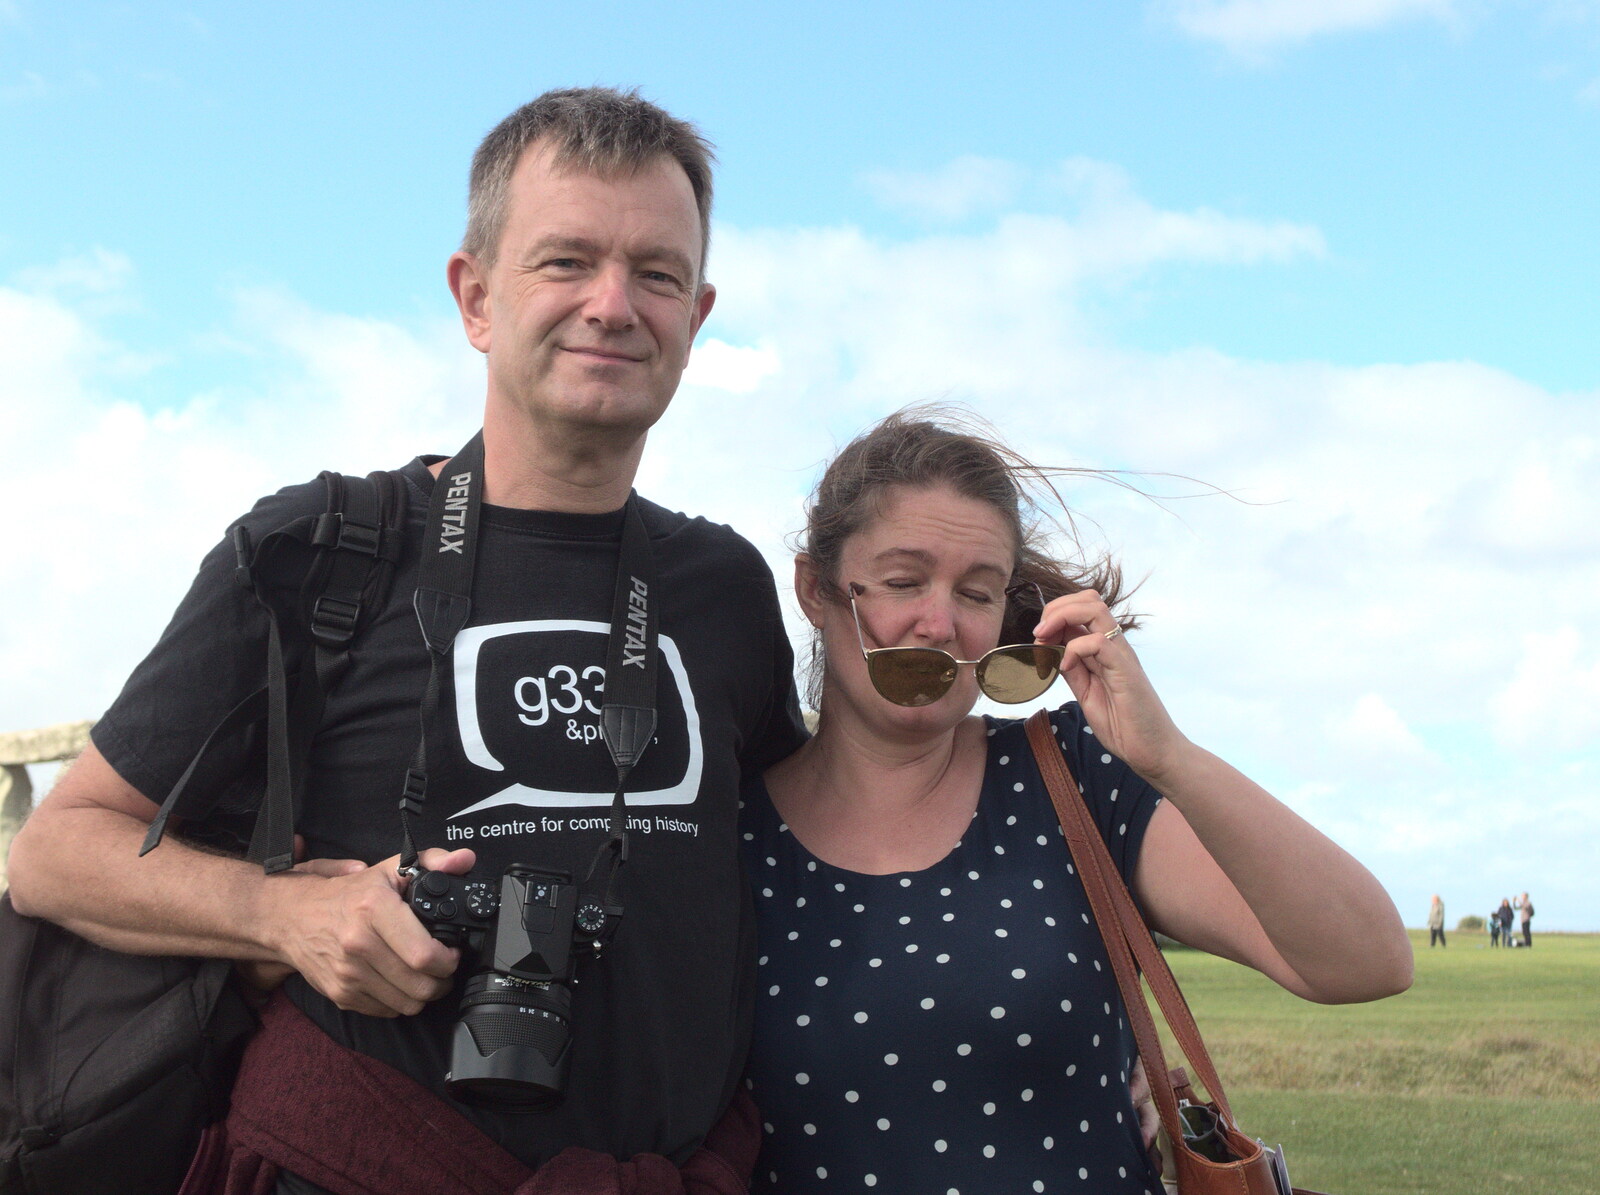 Fred gets a photo of Nosher and Isobel from Stone Circles: Stonehenge and Avebury, Wiltshire - 22nd August 2020